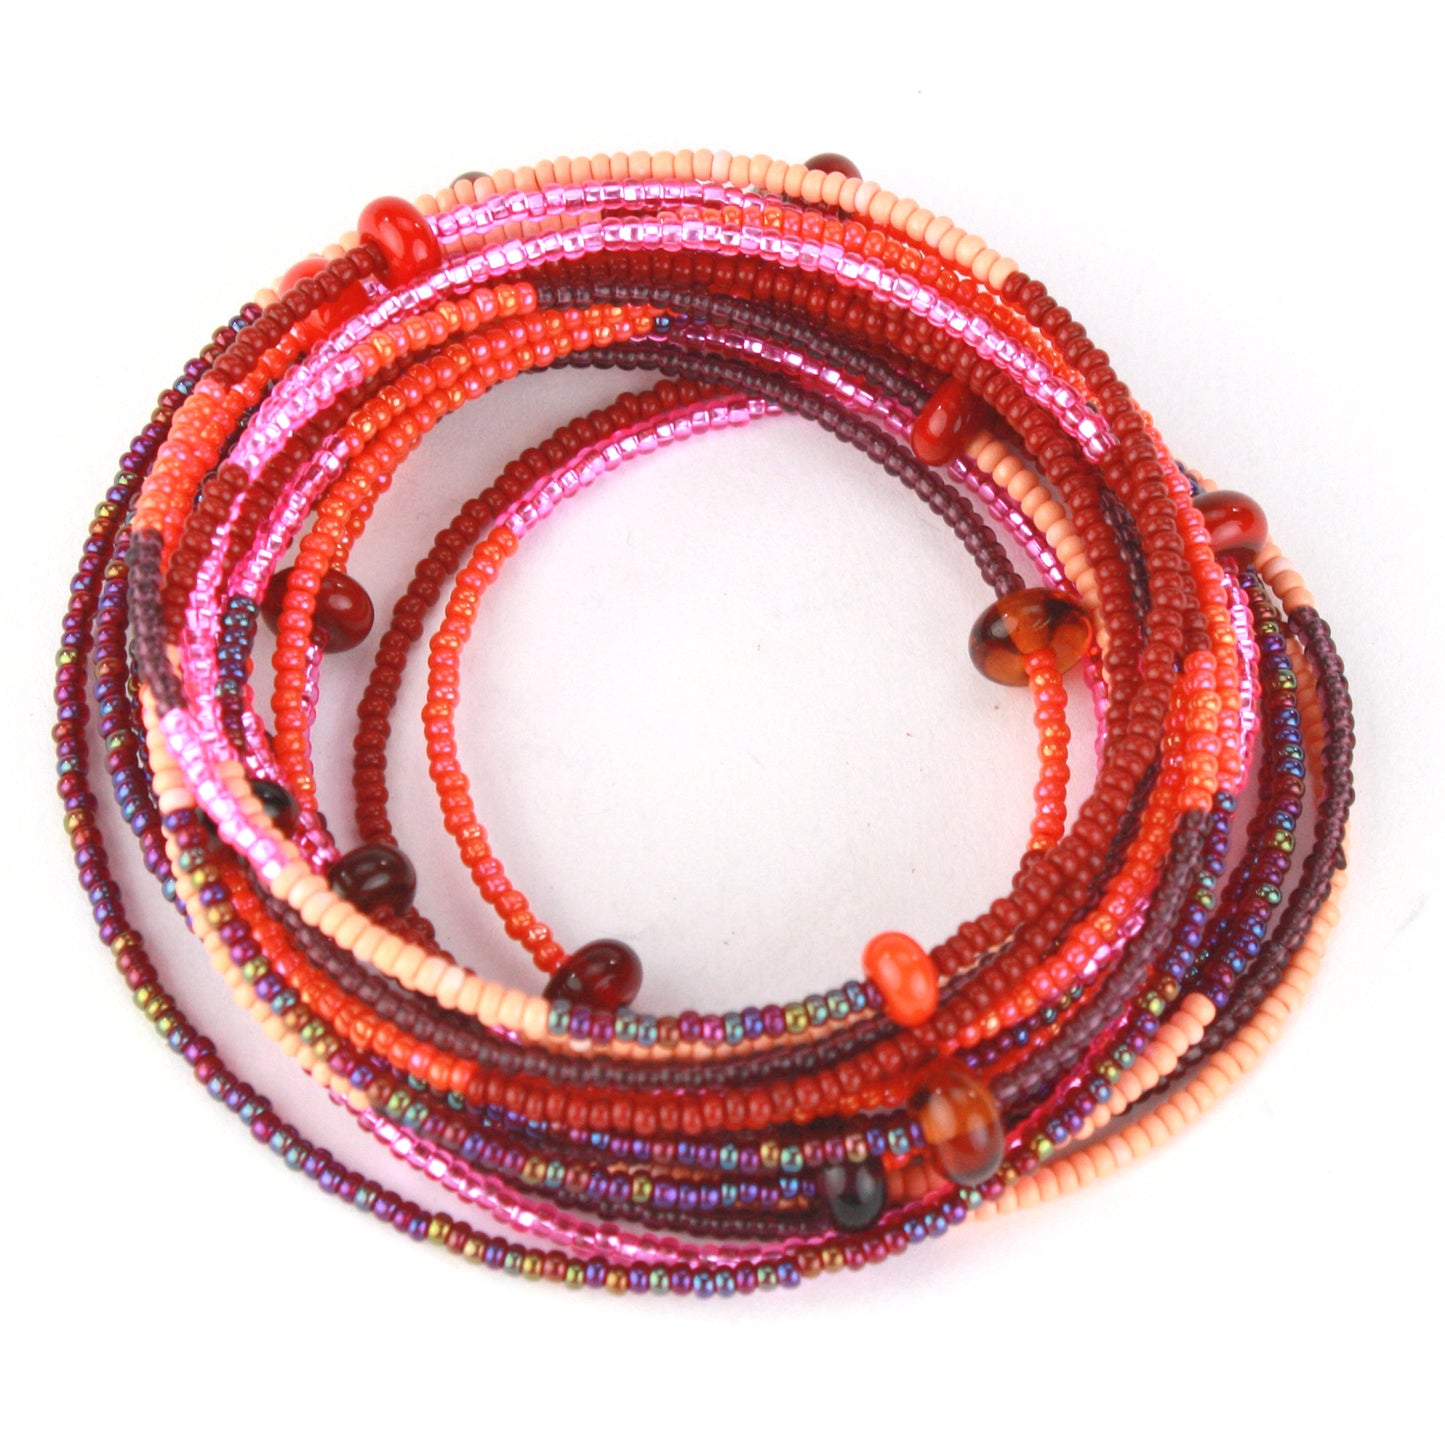 12 foot necklace - Reds, oranges and pinks